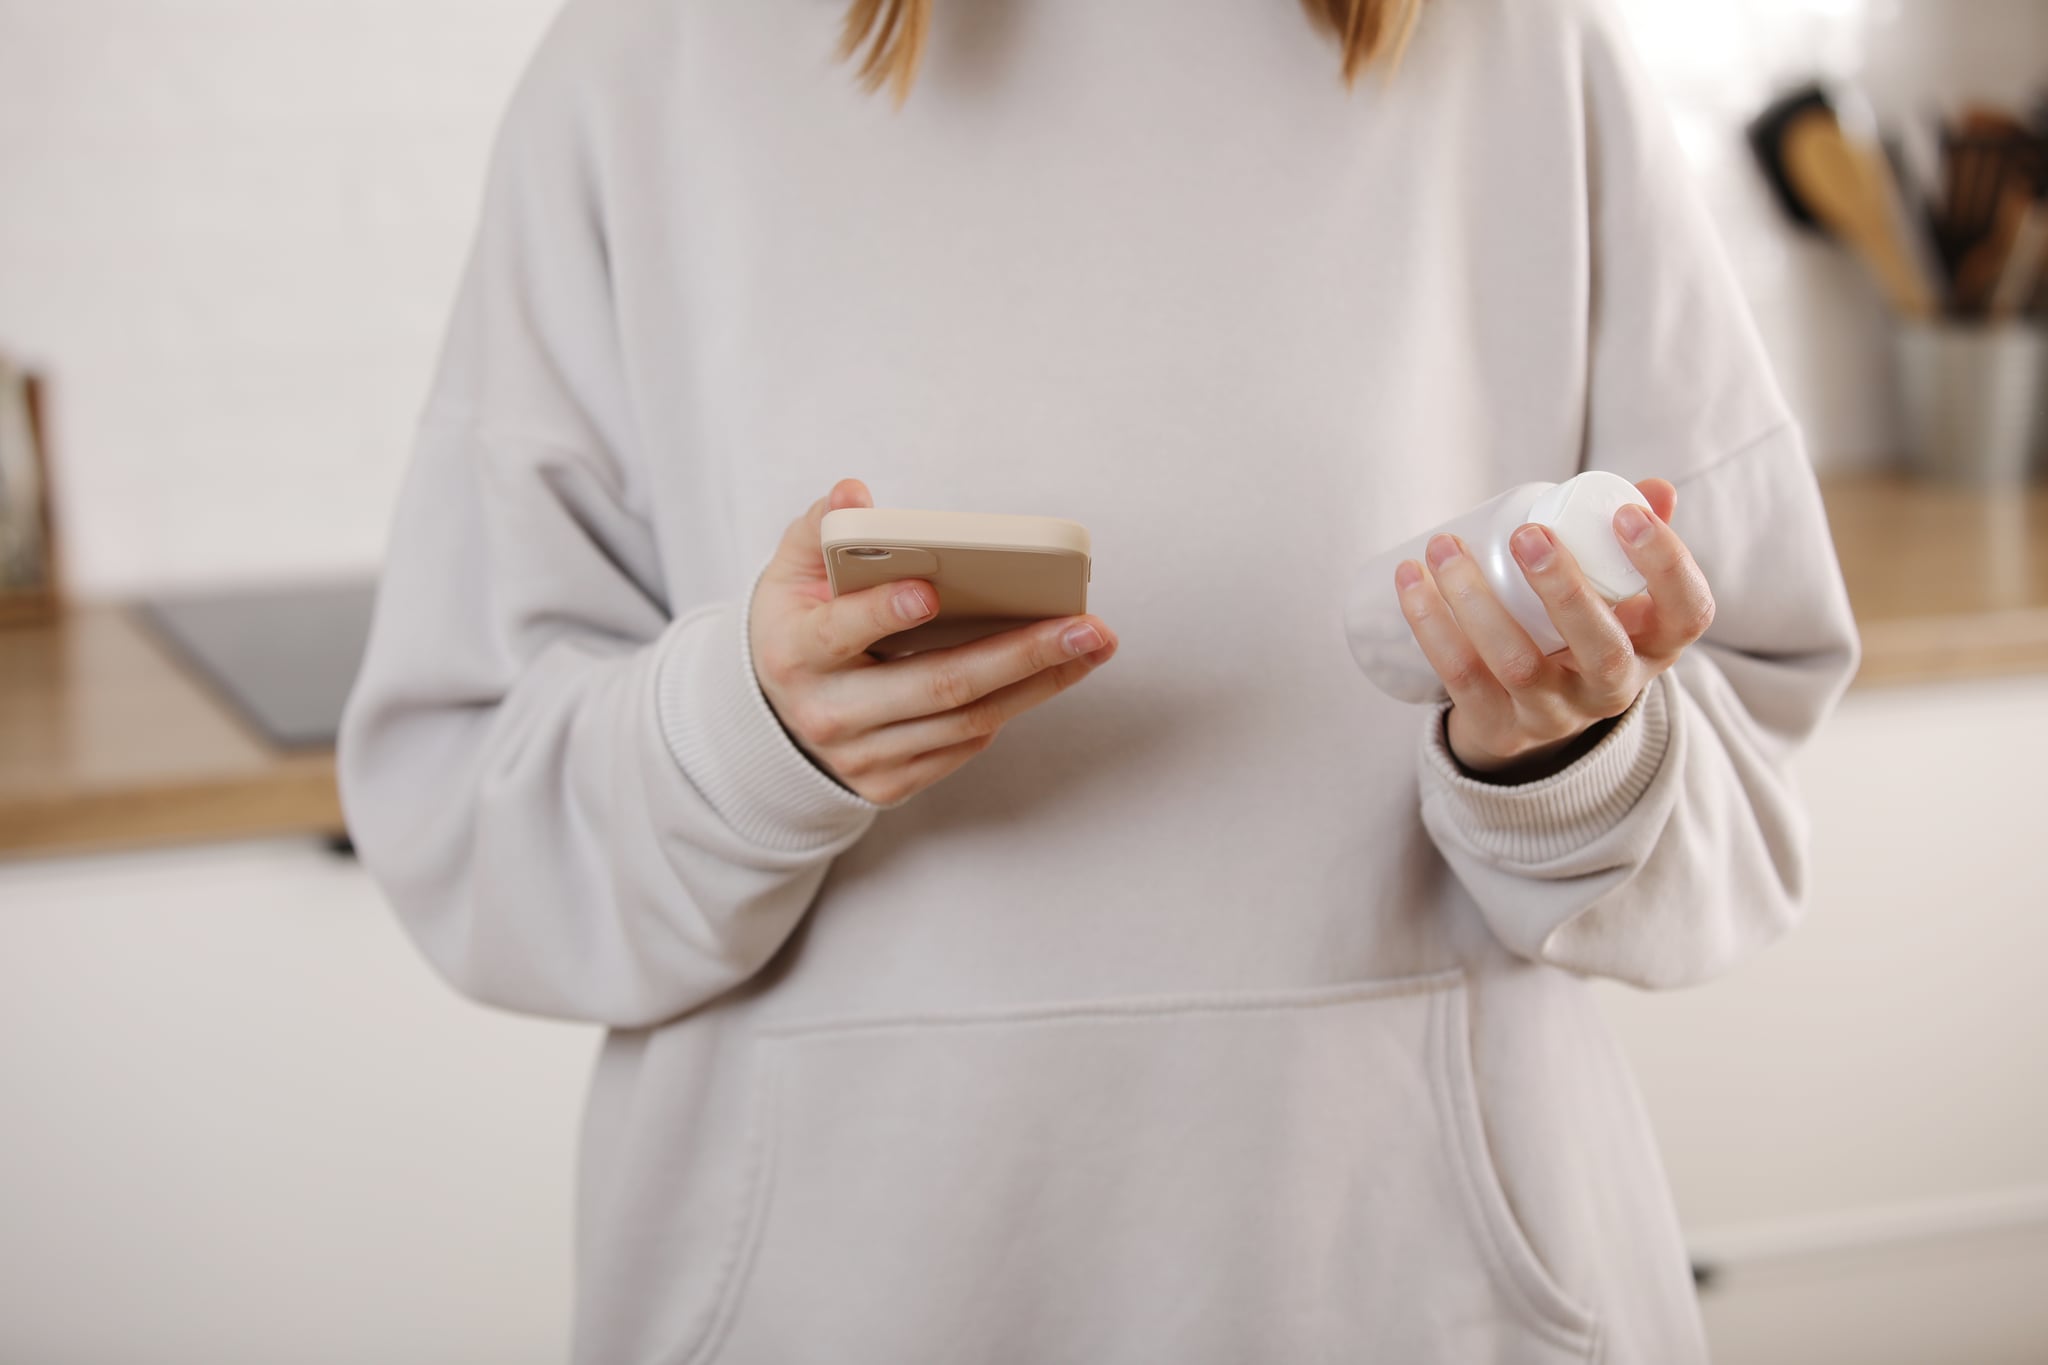 Woman Taking Medicine. Young woman Holding bottle With Pills In Hand And Reading Medical Instructions in the cellphone. Ill woman looking at medication explanation before taking prescription drugs